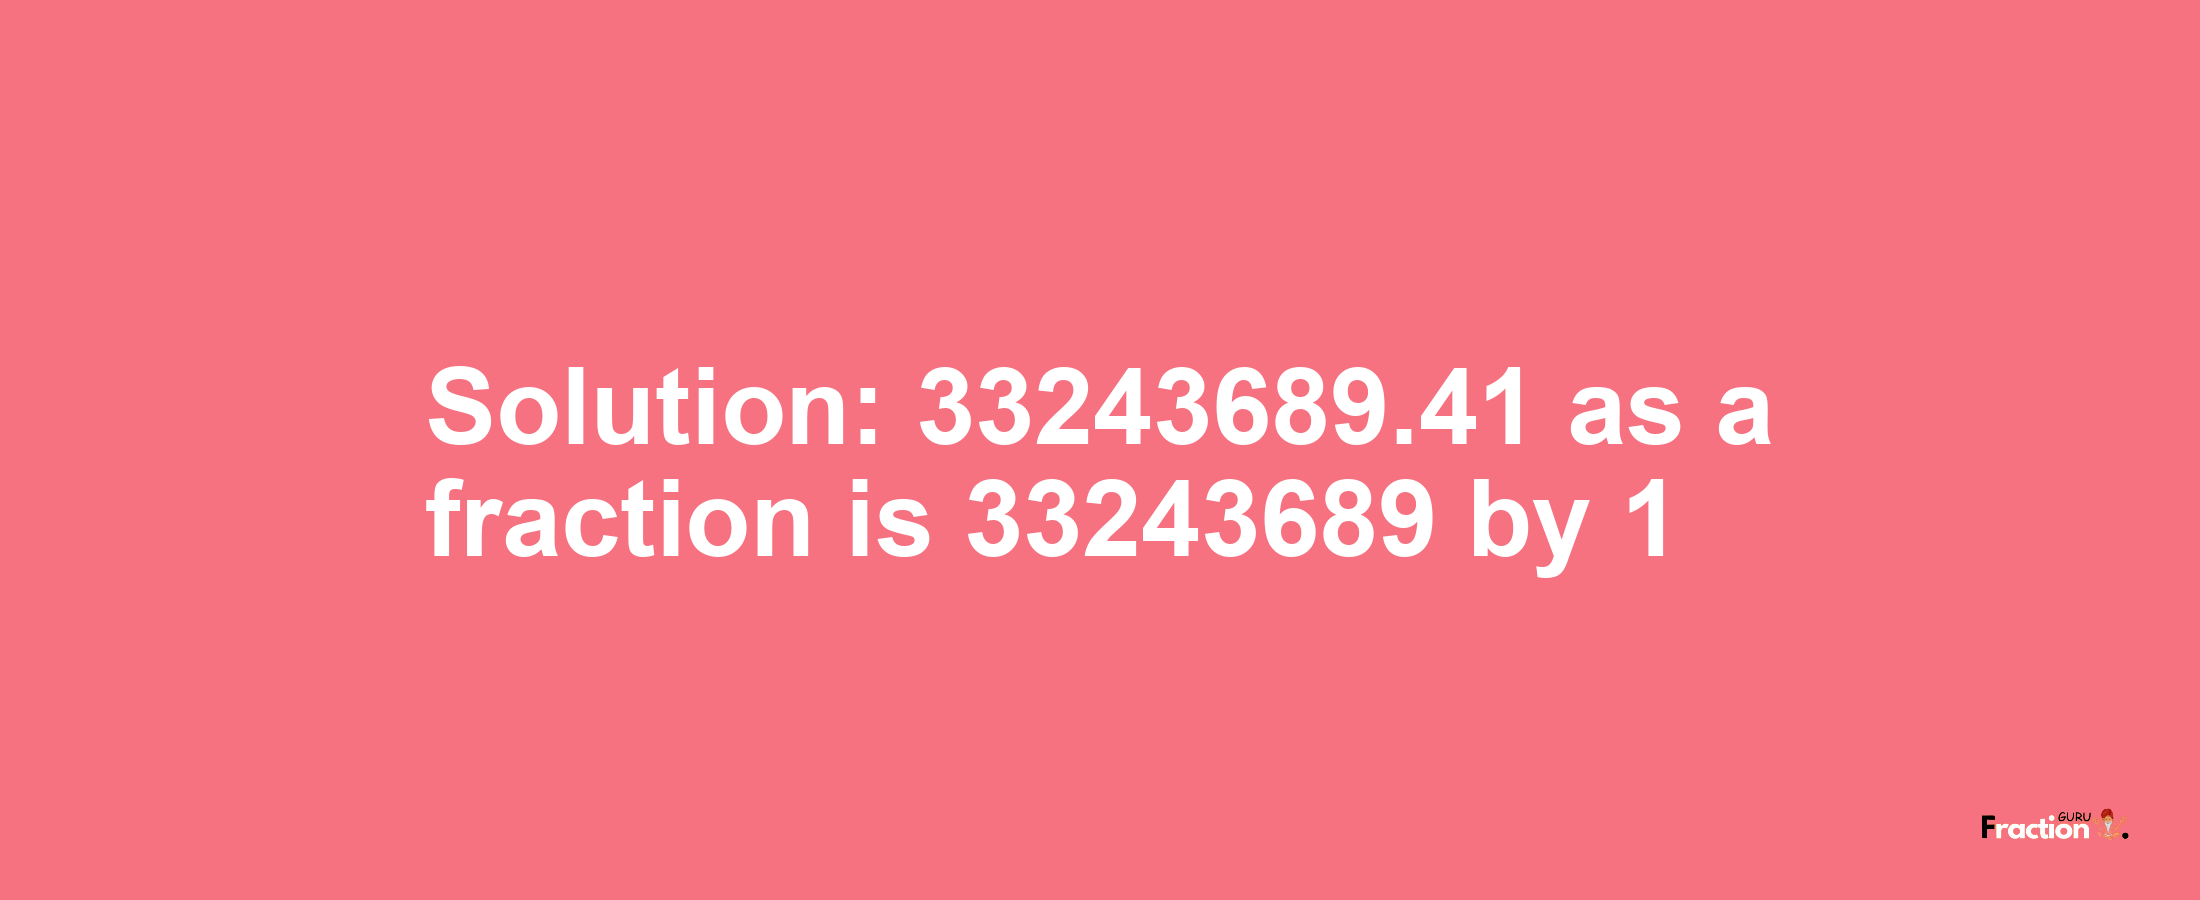 Solution:33243689.41 as a fraction is 33243689/1